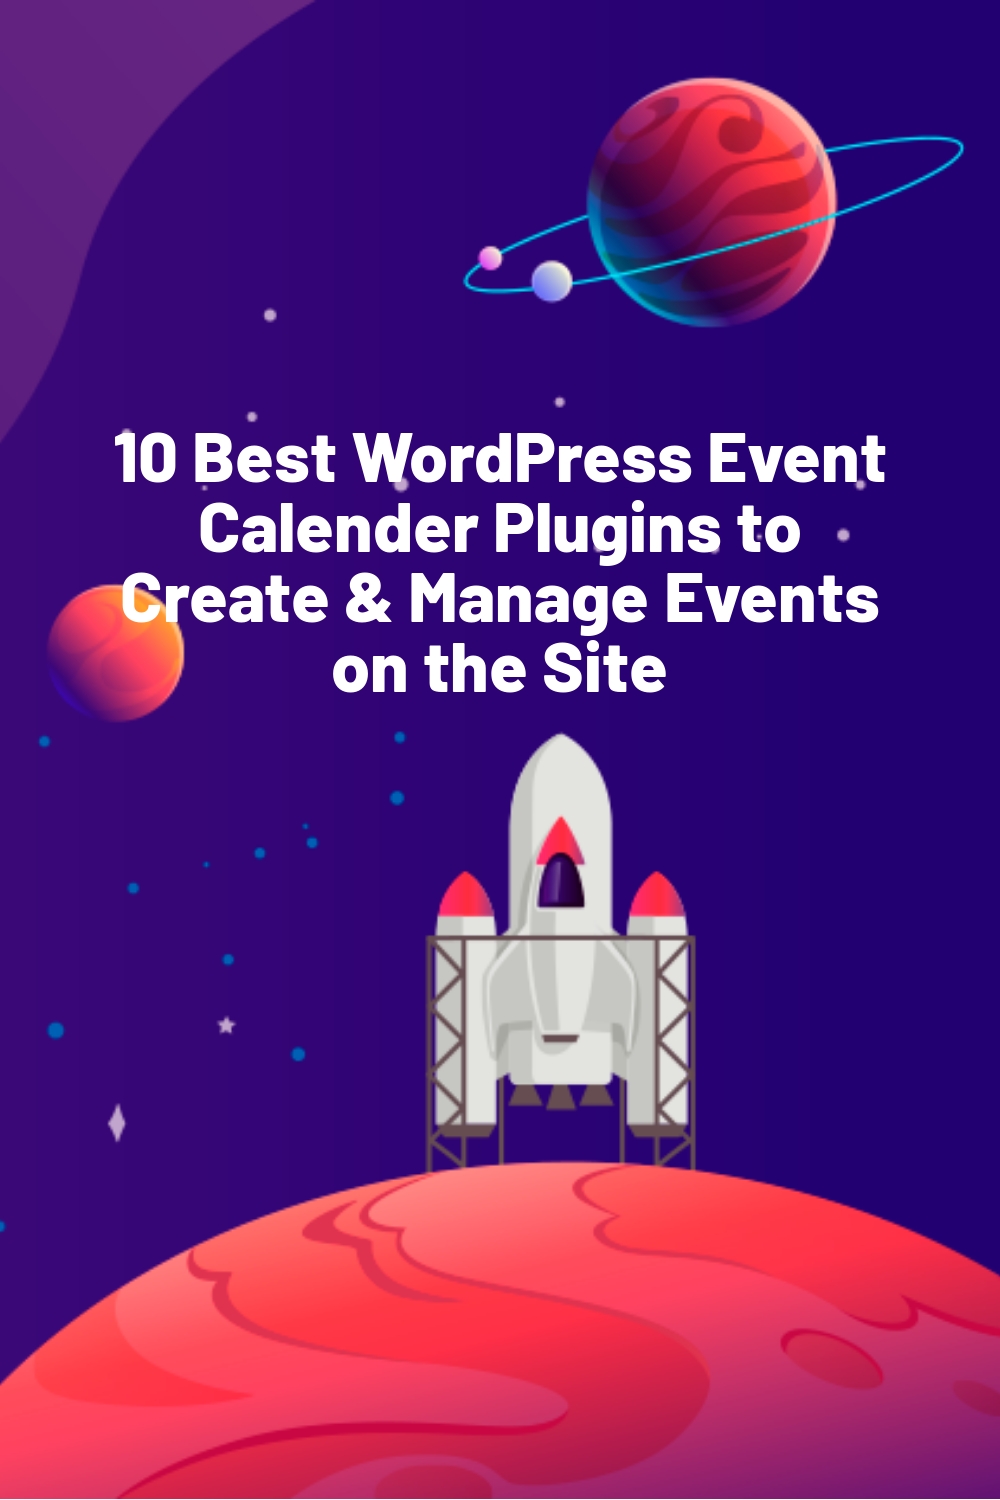 10 Best WordPress Event Calender Plugins to Create & Manage Events on the Site